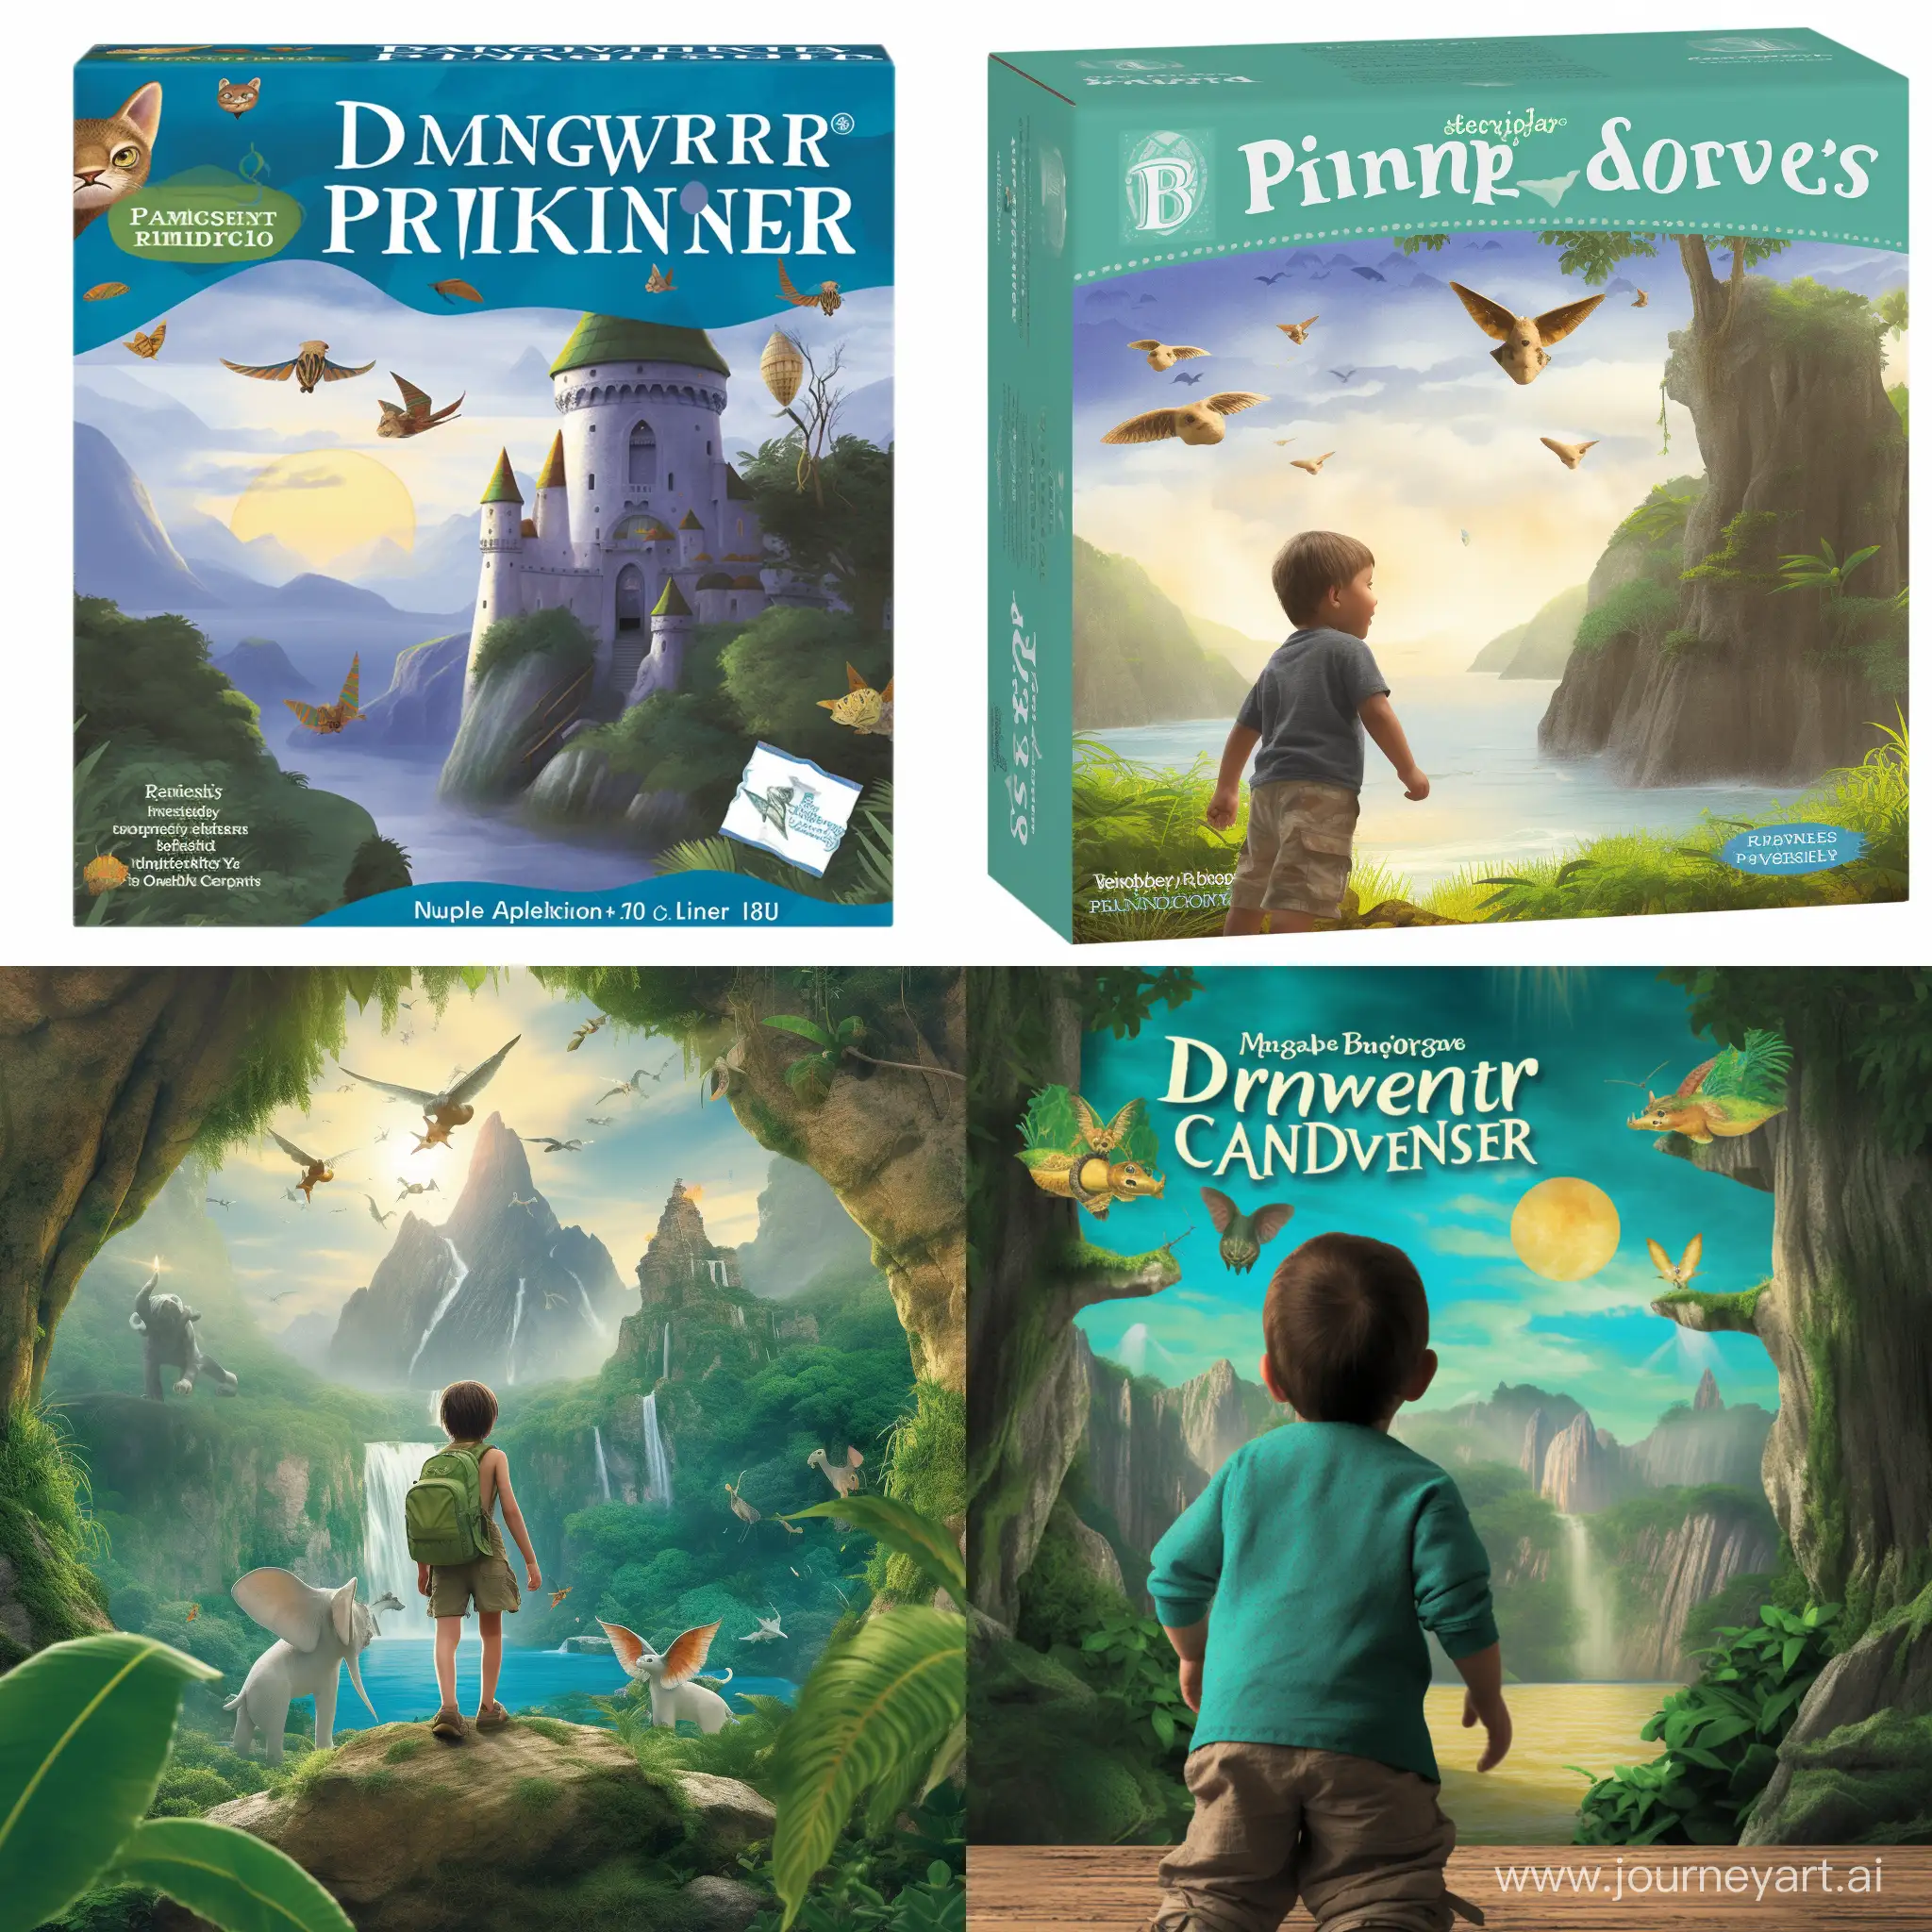 An adventurous 8-year-old boy wearing Pampers Baby Dry size 8 diapers, exploring a magical fantasy world filled with talking animals and enchanting creatures. The boy's eyes are filled with wonder and excitement as he embarks on a thrilling adventure, surrounded by lush landscapes and whimsical details.
Modifiers: Adventurous, imaginative, fantastical, magical, curious, courageous, dreamlike, whimsical
Artist/Style Inspiration: Inspired by the works of Brian Froud, Maurice Sendak, and Chris Riddell
Technical Specifications: Wide angle lens, vibrant color palette, surreal lighting, detailed textures, fantastical creatures, --v 5 --q 2